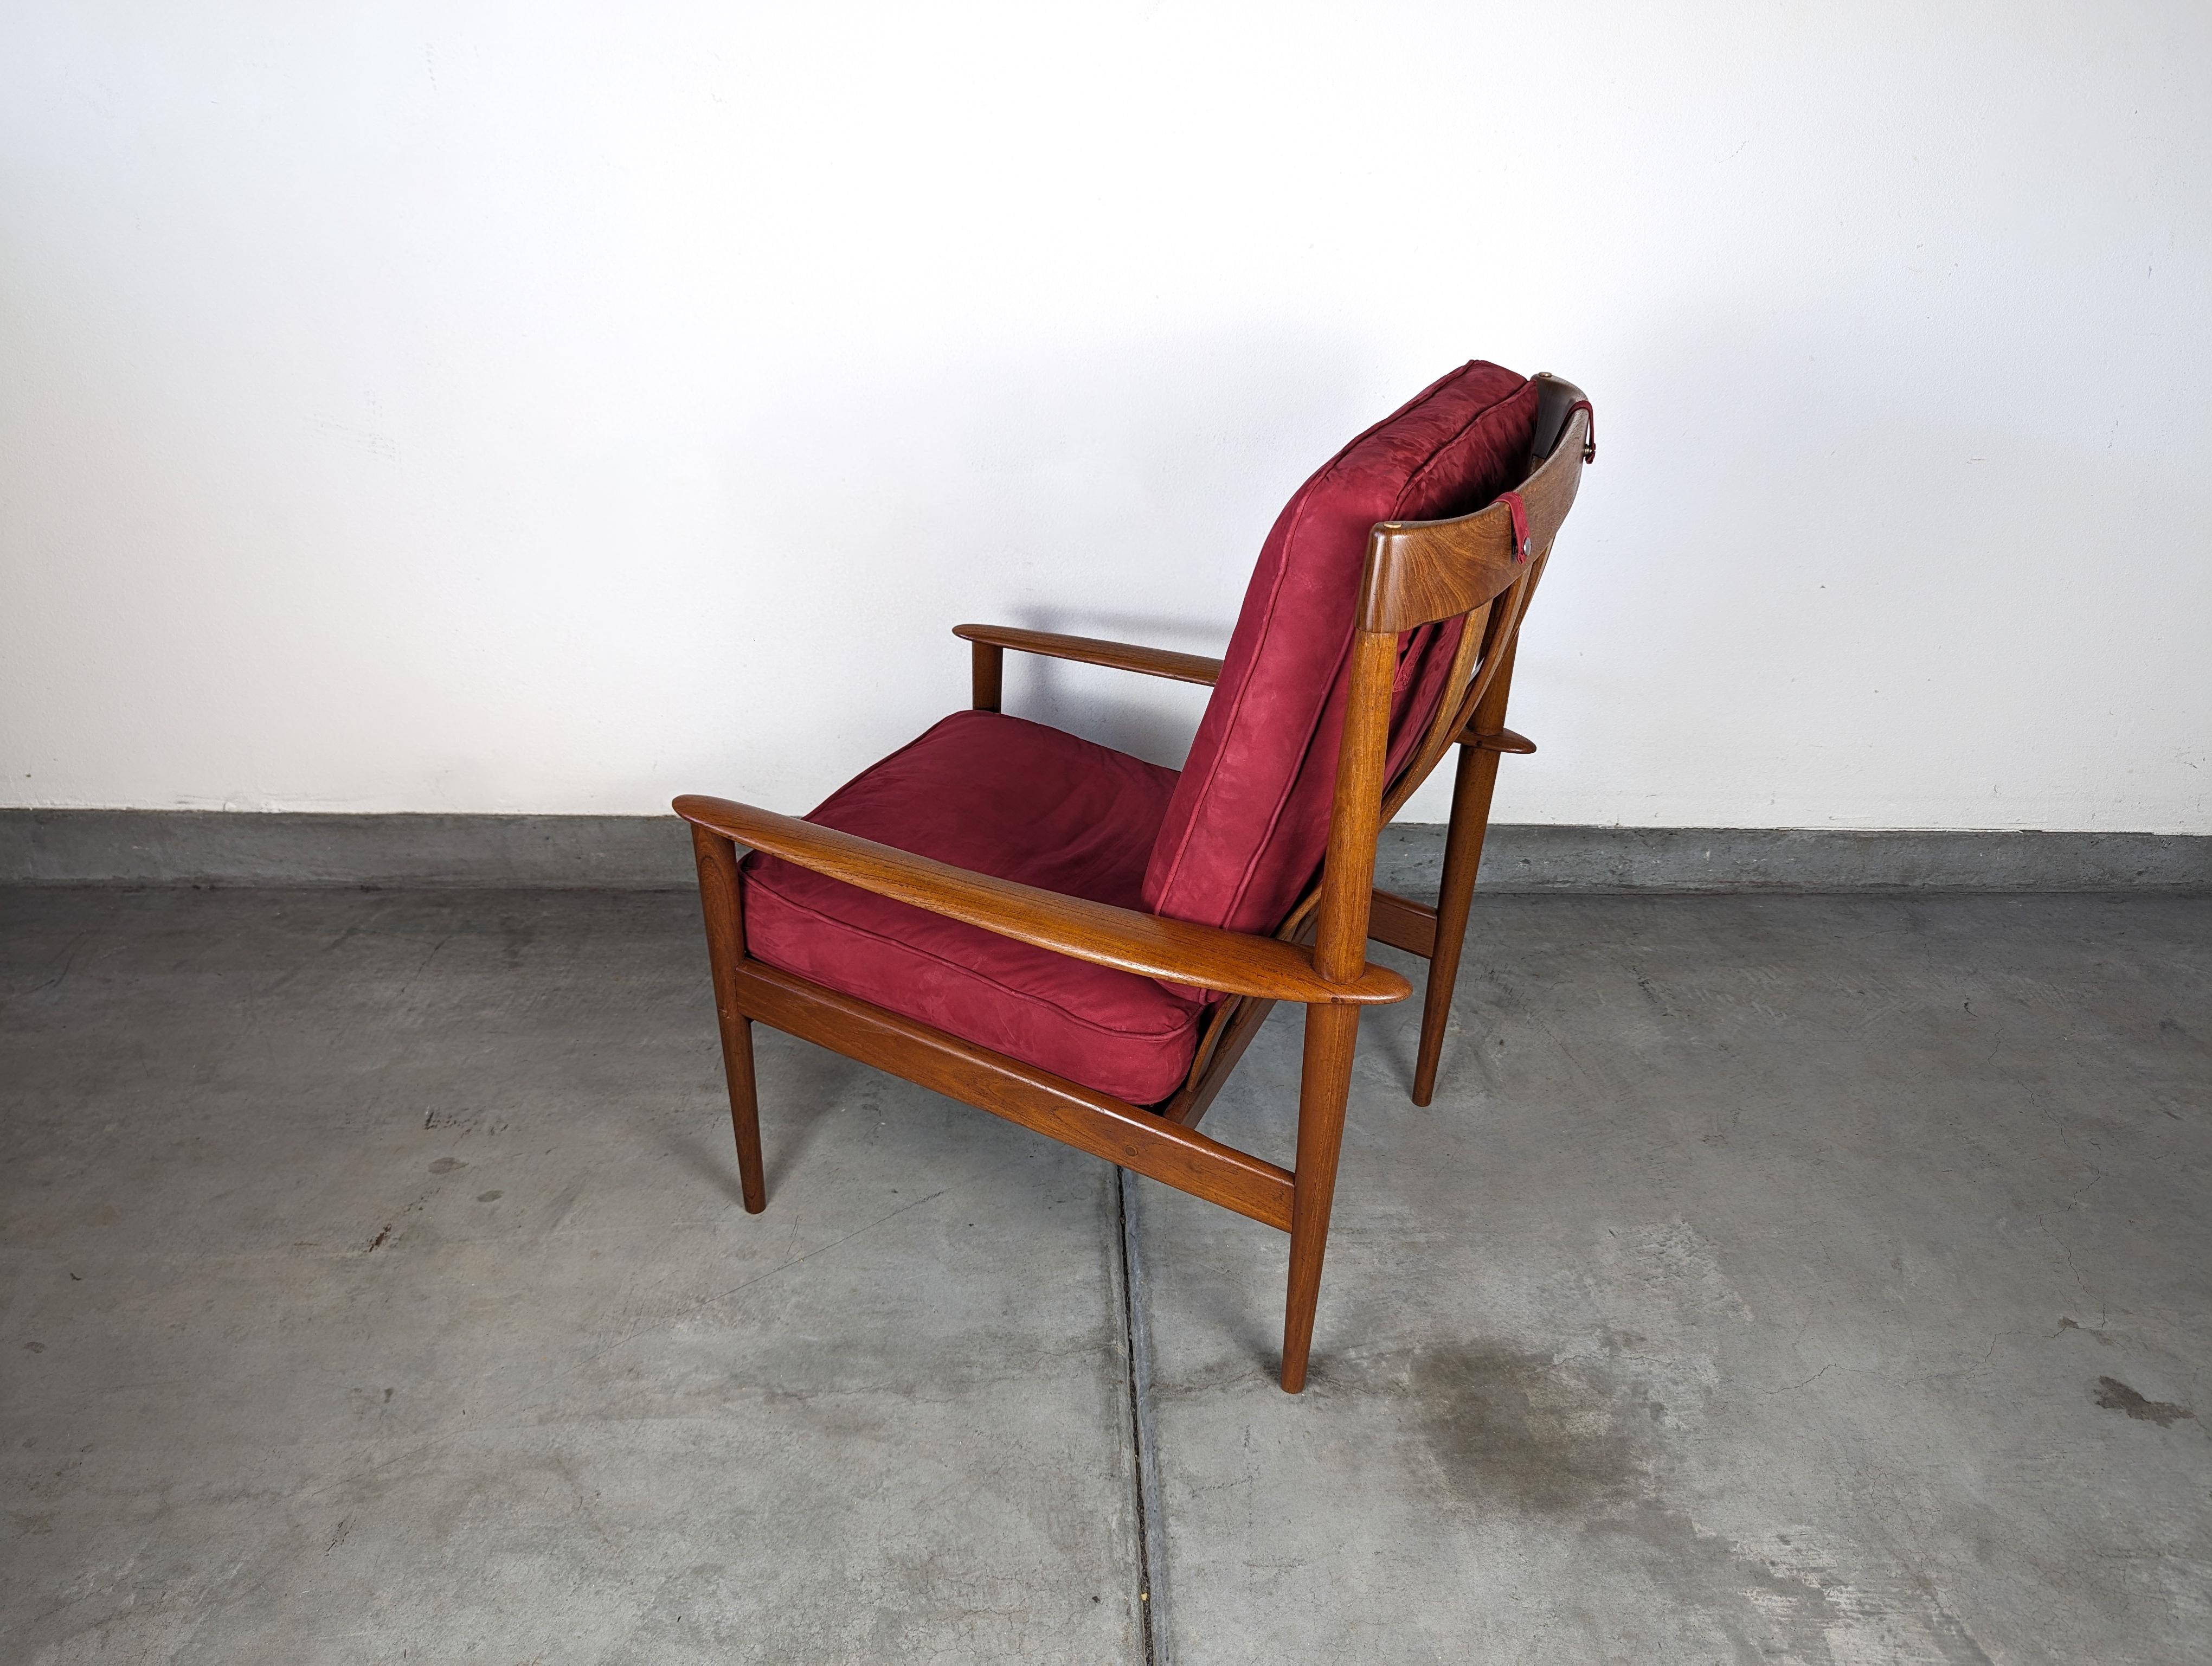 Leather Mid-Century Modern Lounge Chair by Grete Jalk, PJ56 Highback Model, c1960s For Sale